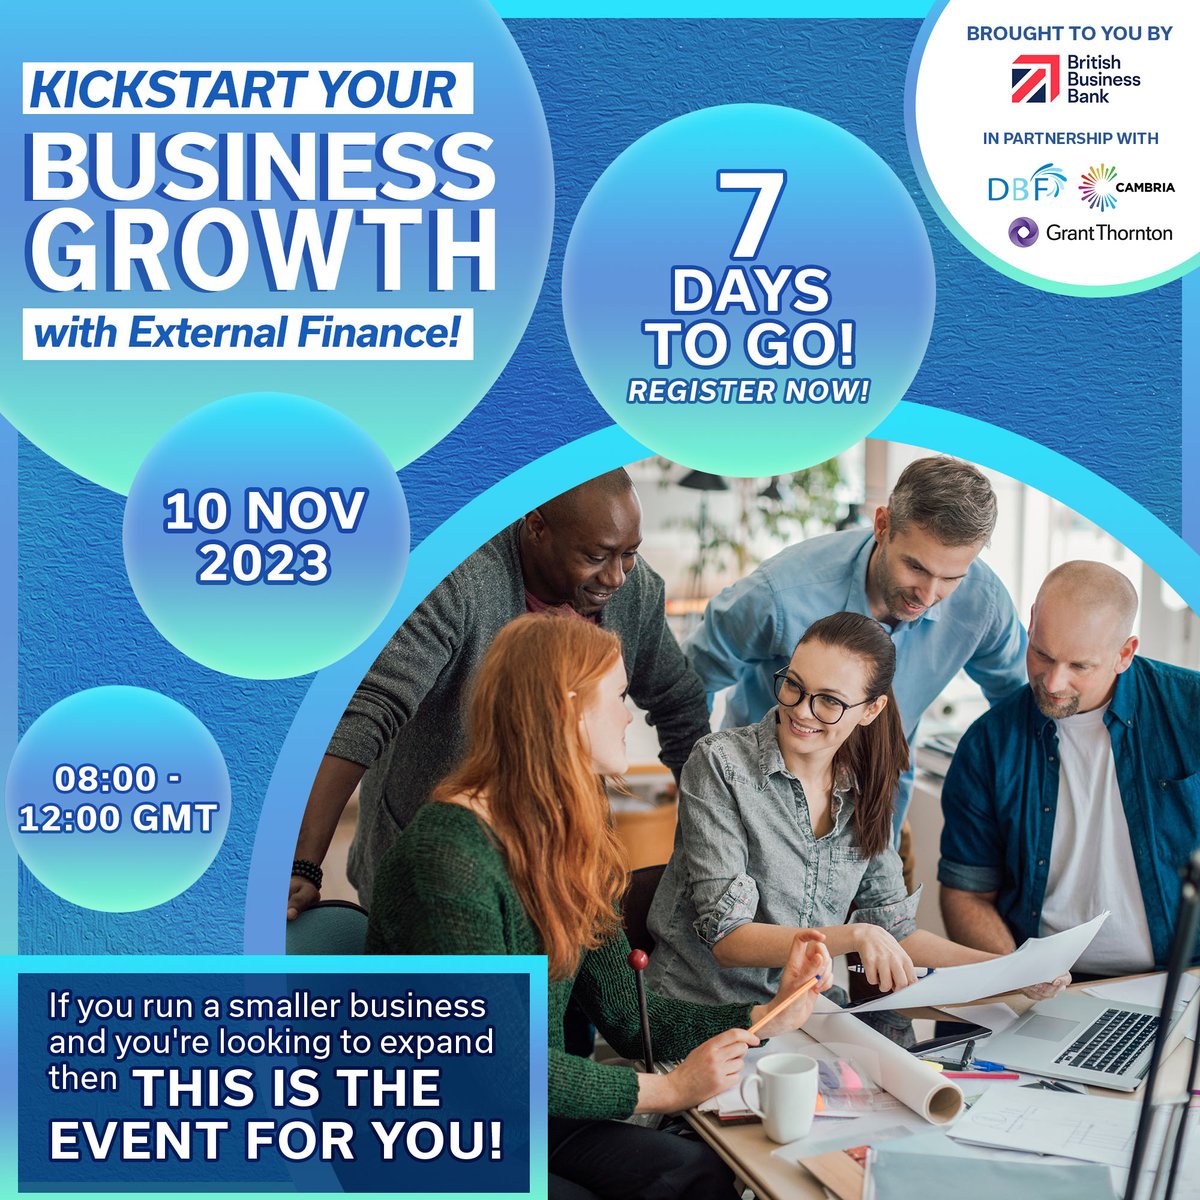 🚀 Just 7 days to go! Join us on 10-11 at Coleg Cambria for a game-changing event hosted British Business Bank, Deeside Business Forum, and Grant Thornton on how to supercharge your business with external finance. Ready? t.ly/cuzWs #Countdown #BusinessGrowth